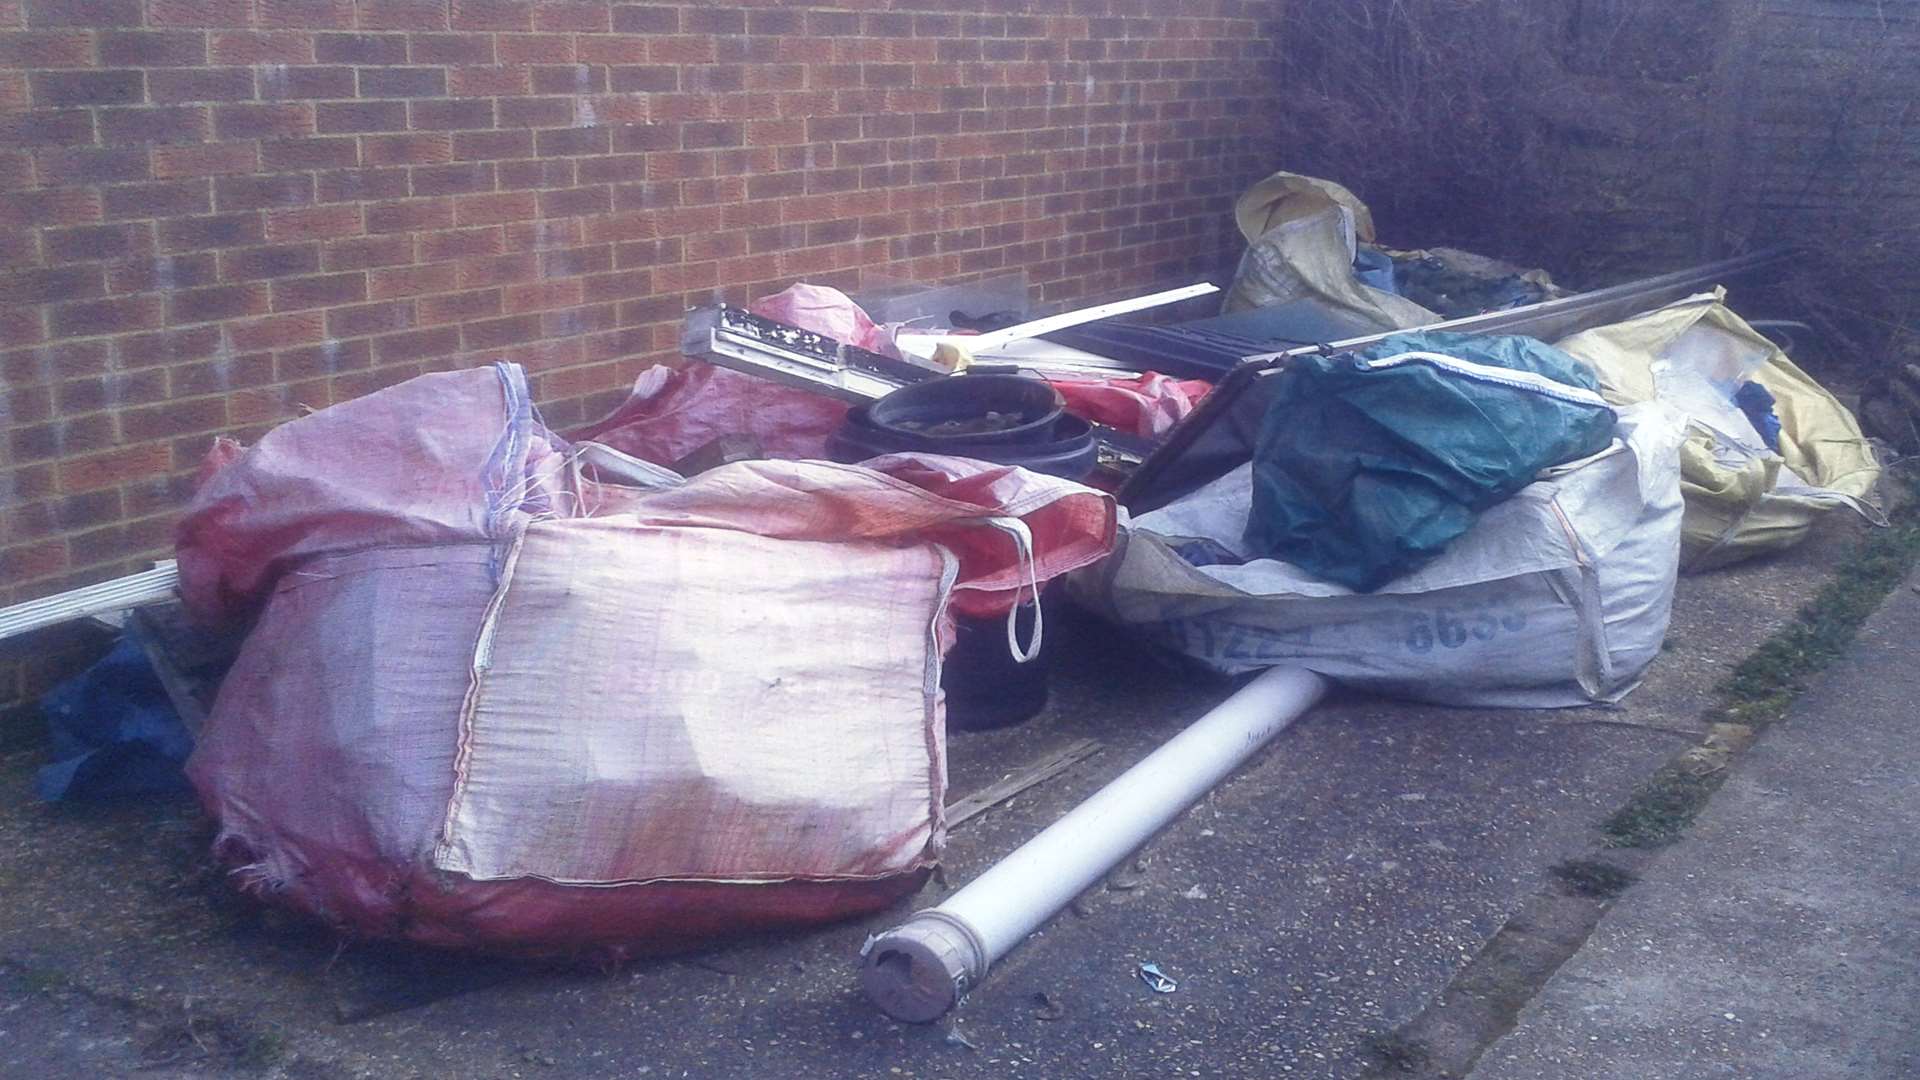 Maria Hooker and Dean West have been fined £2,500 for not clearing the junk dumped in the parking bay. Picture: Medway Council.